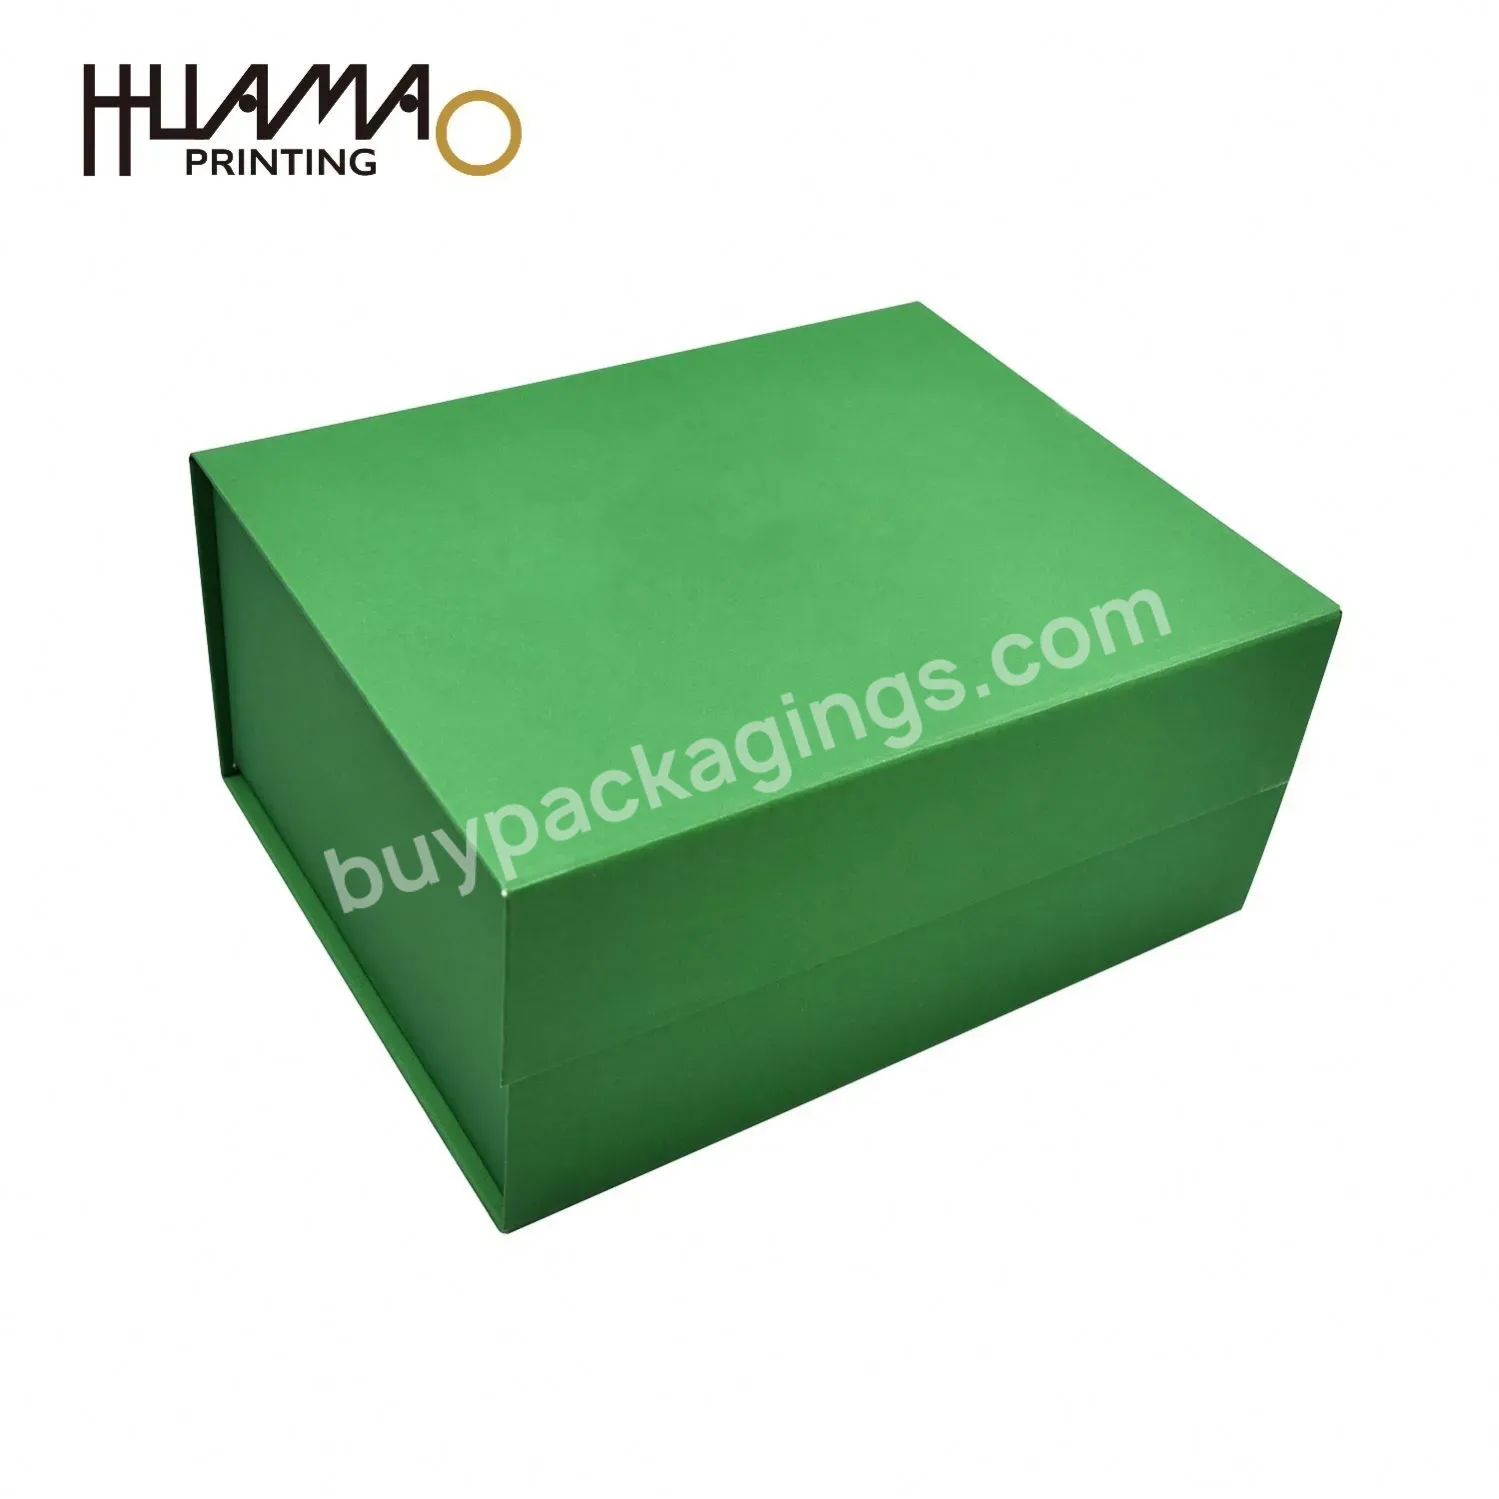 Pharmacy Paper Bags Carton Box Caixas De Papel Book Printing Services Collapsible Paper Container Foldbable Box Packaging